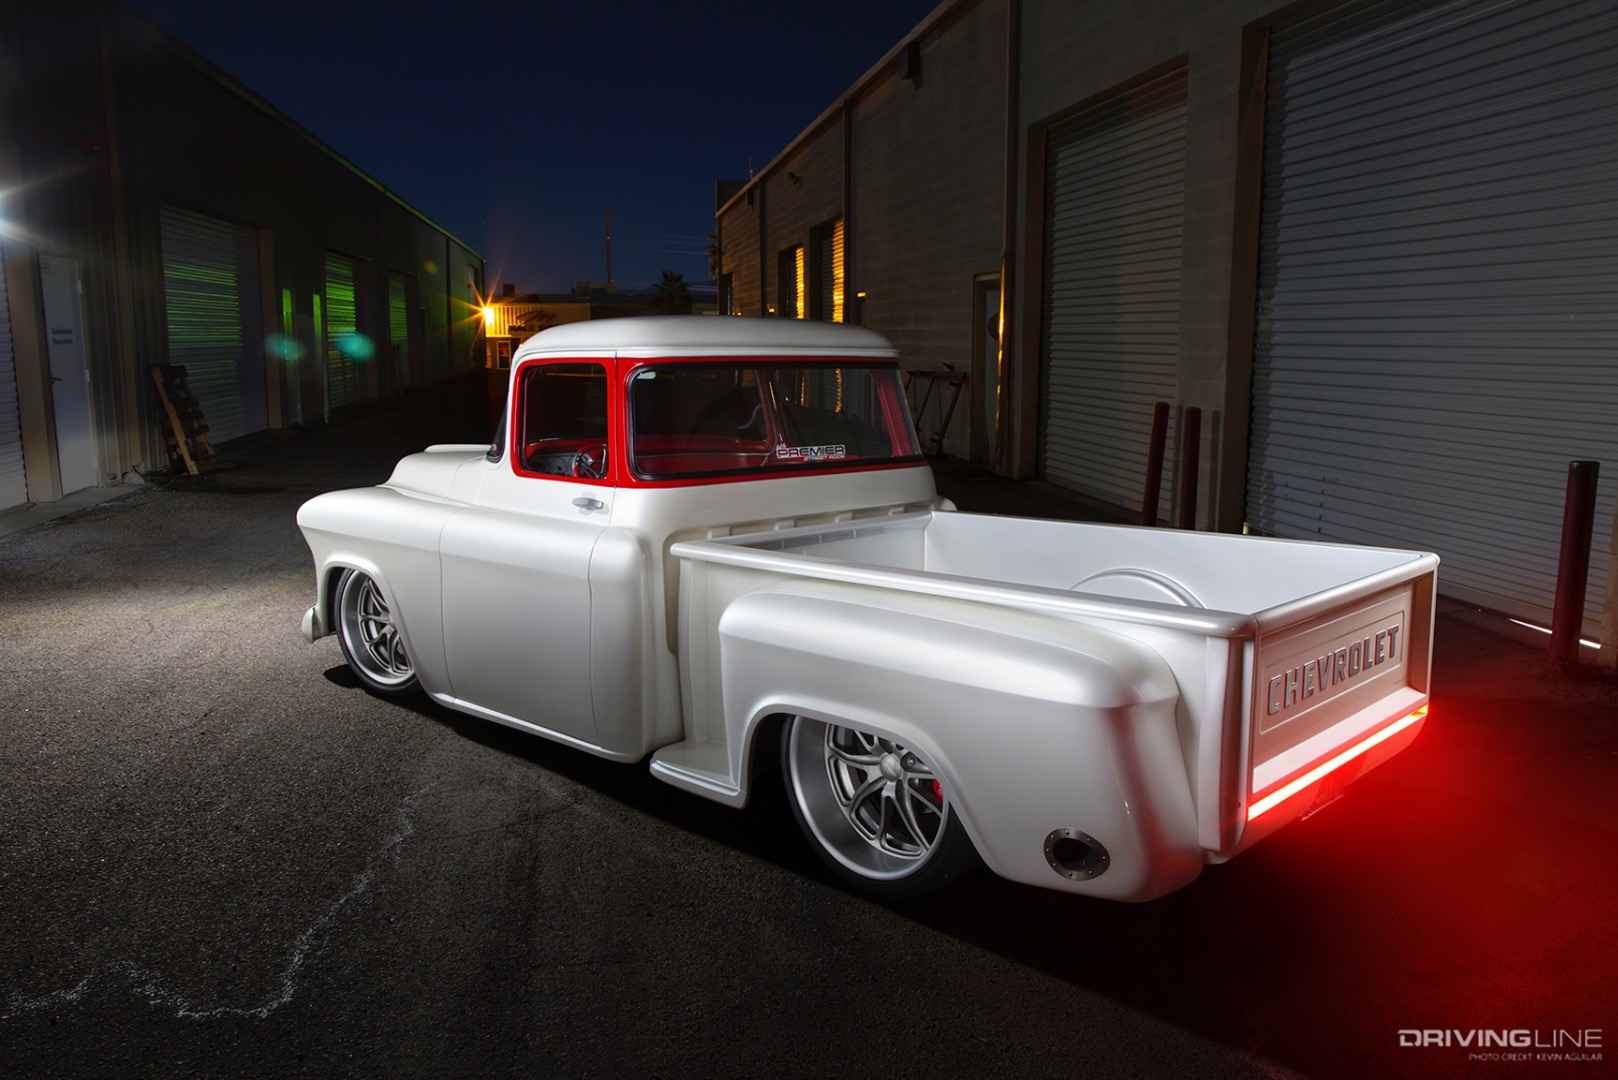 Snow White Revisited: The Fairytale of this Custom ’57 Chevy Truck